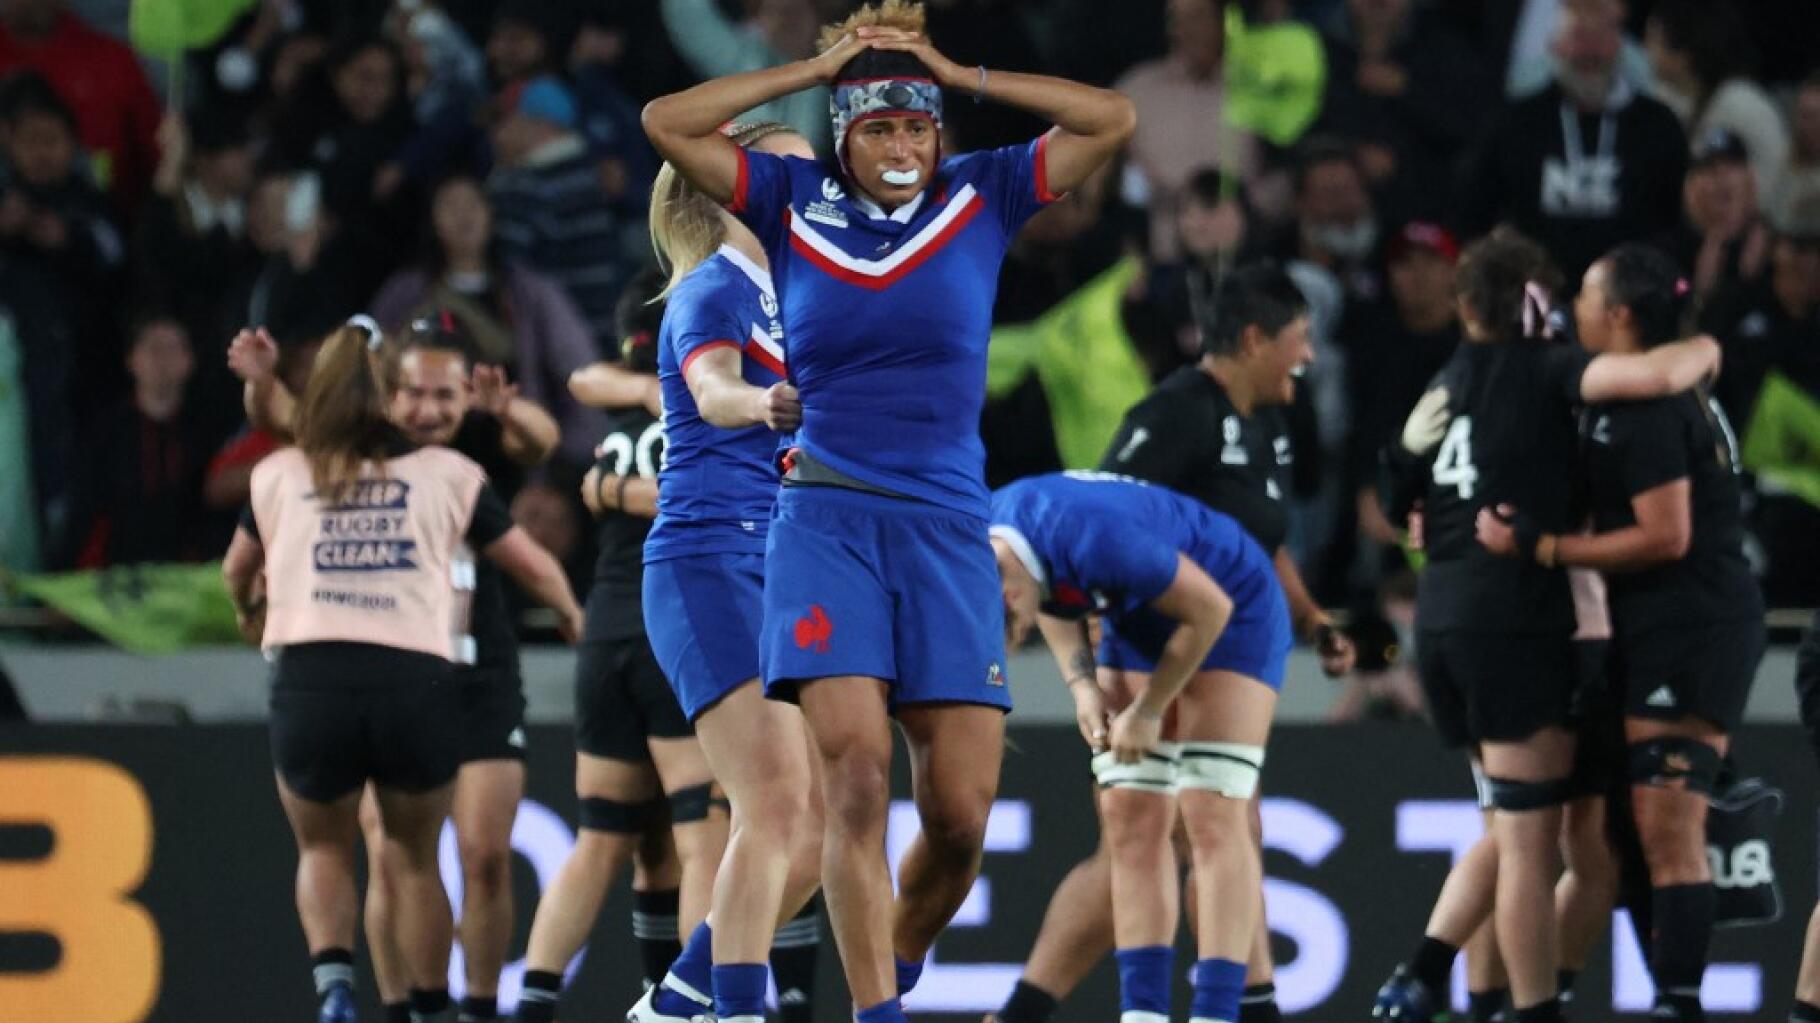 New Zealand: France loses after a close match